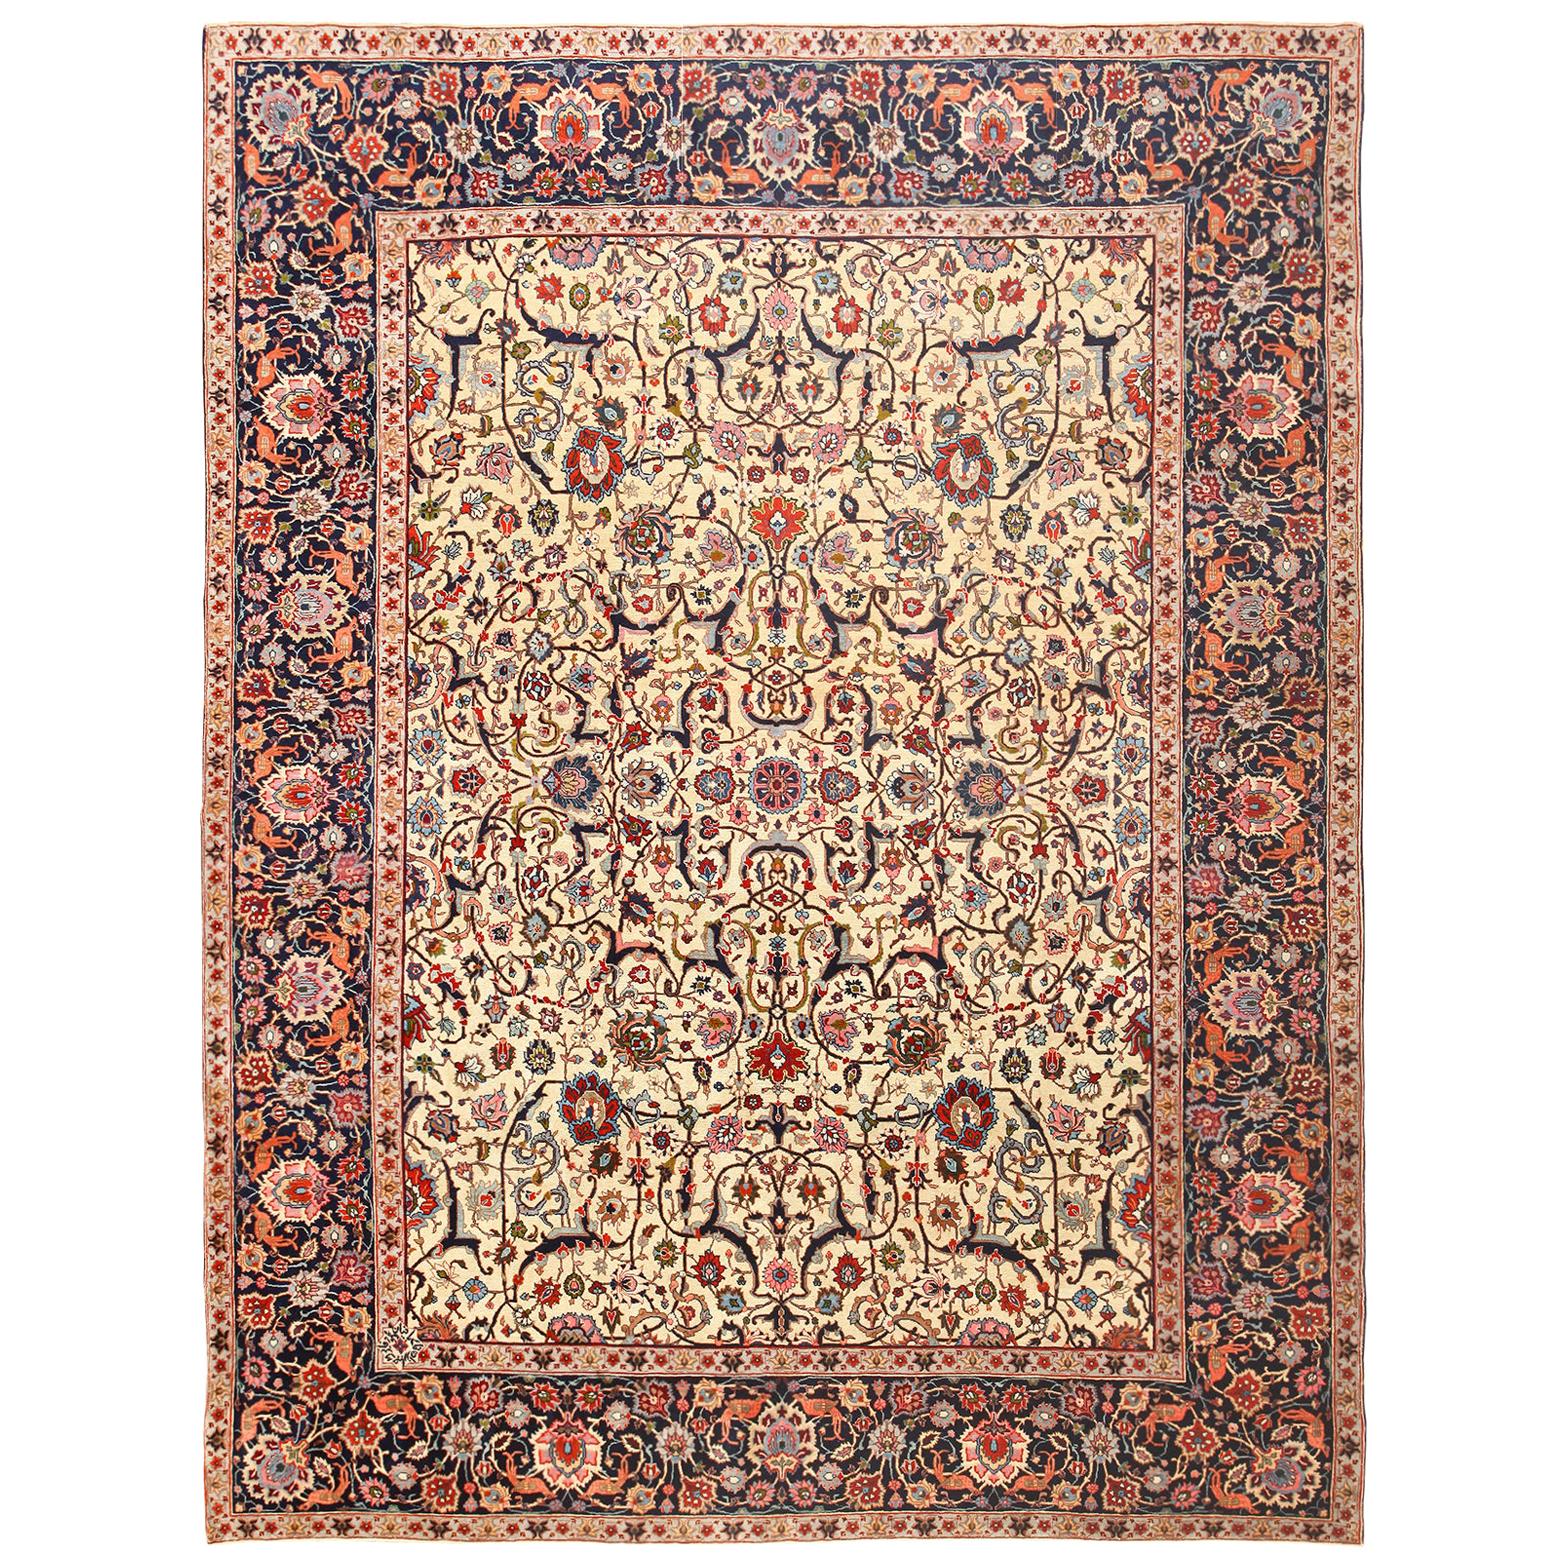 Antique Persian Tabriz Rug. Size: 9 ft 4 in x 12 ft 6 in For Sale